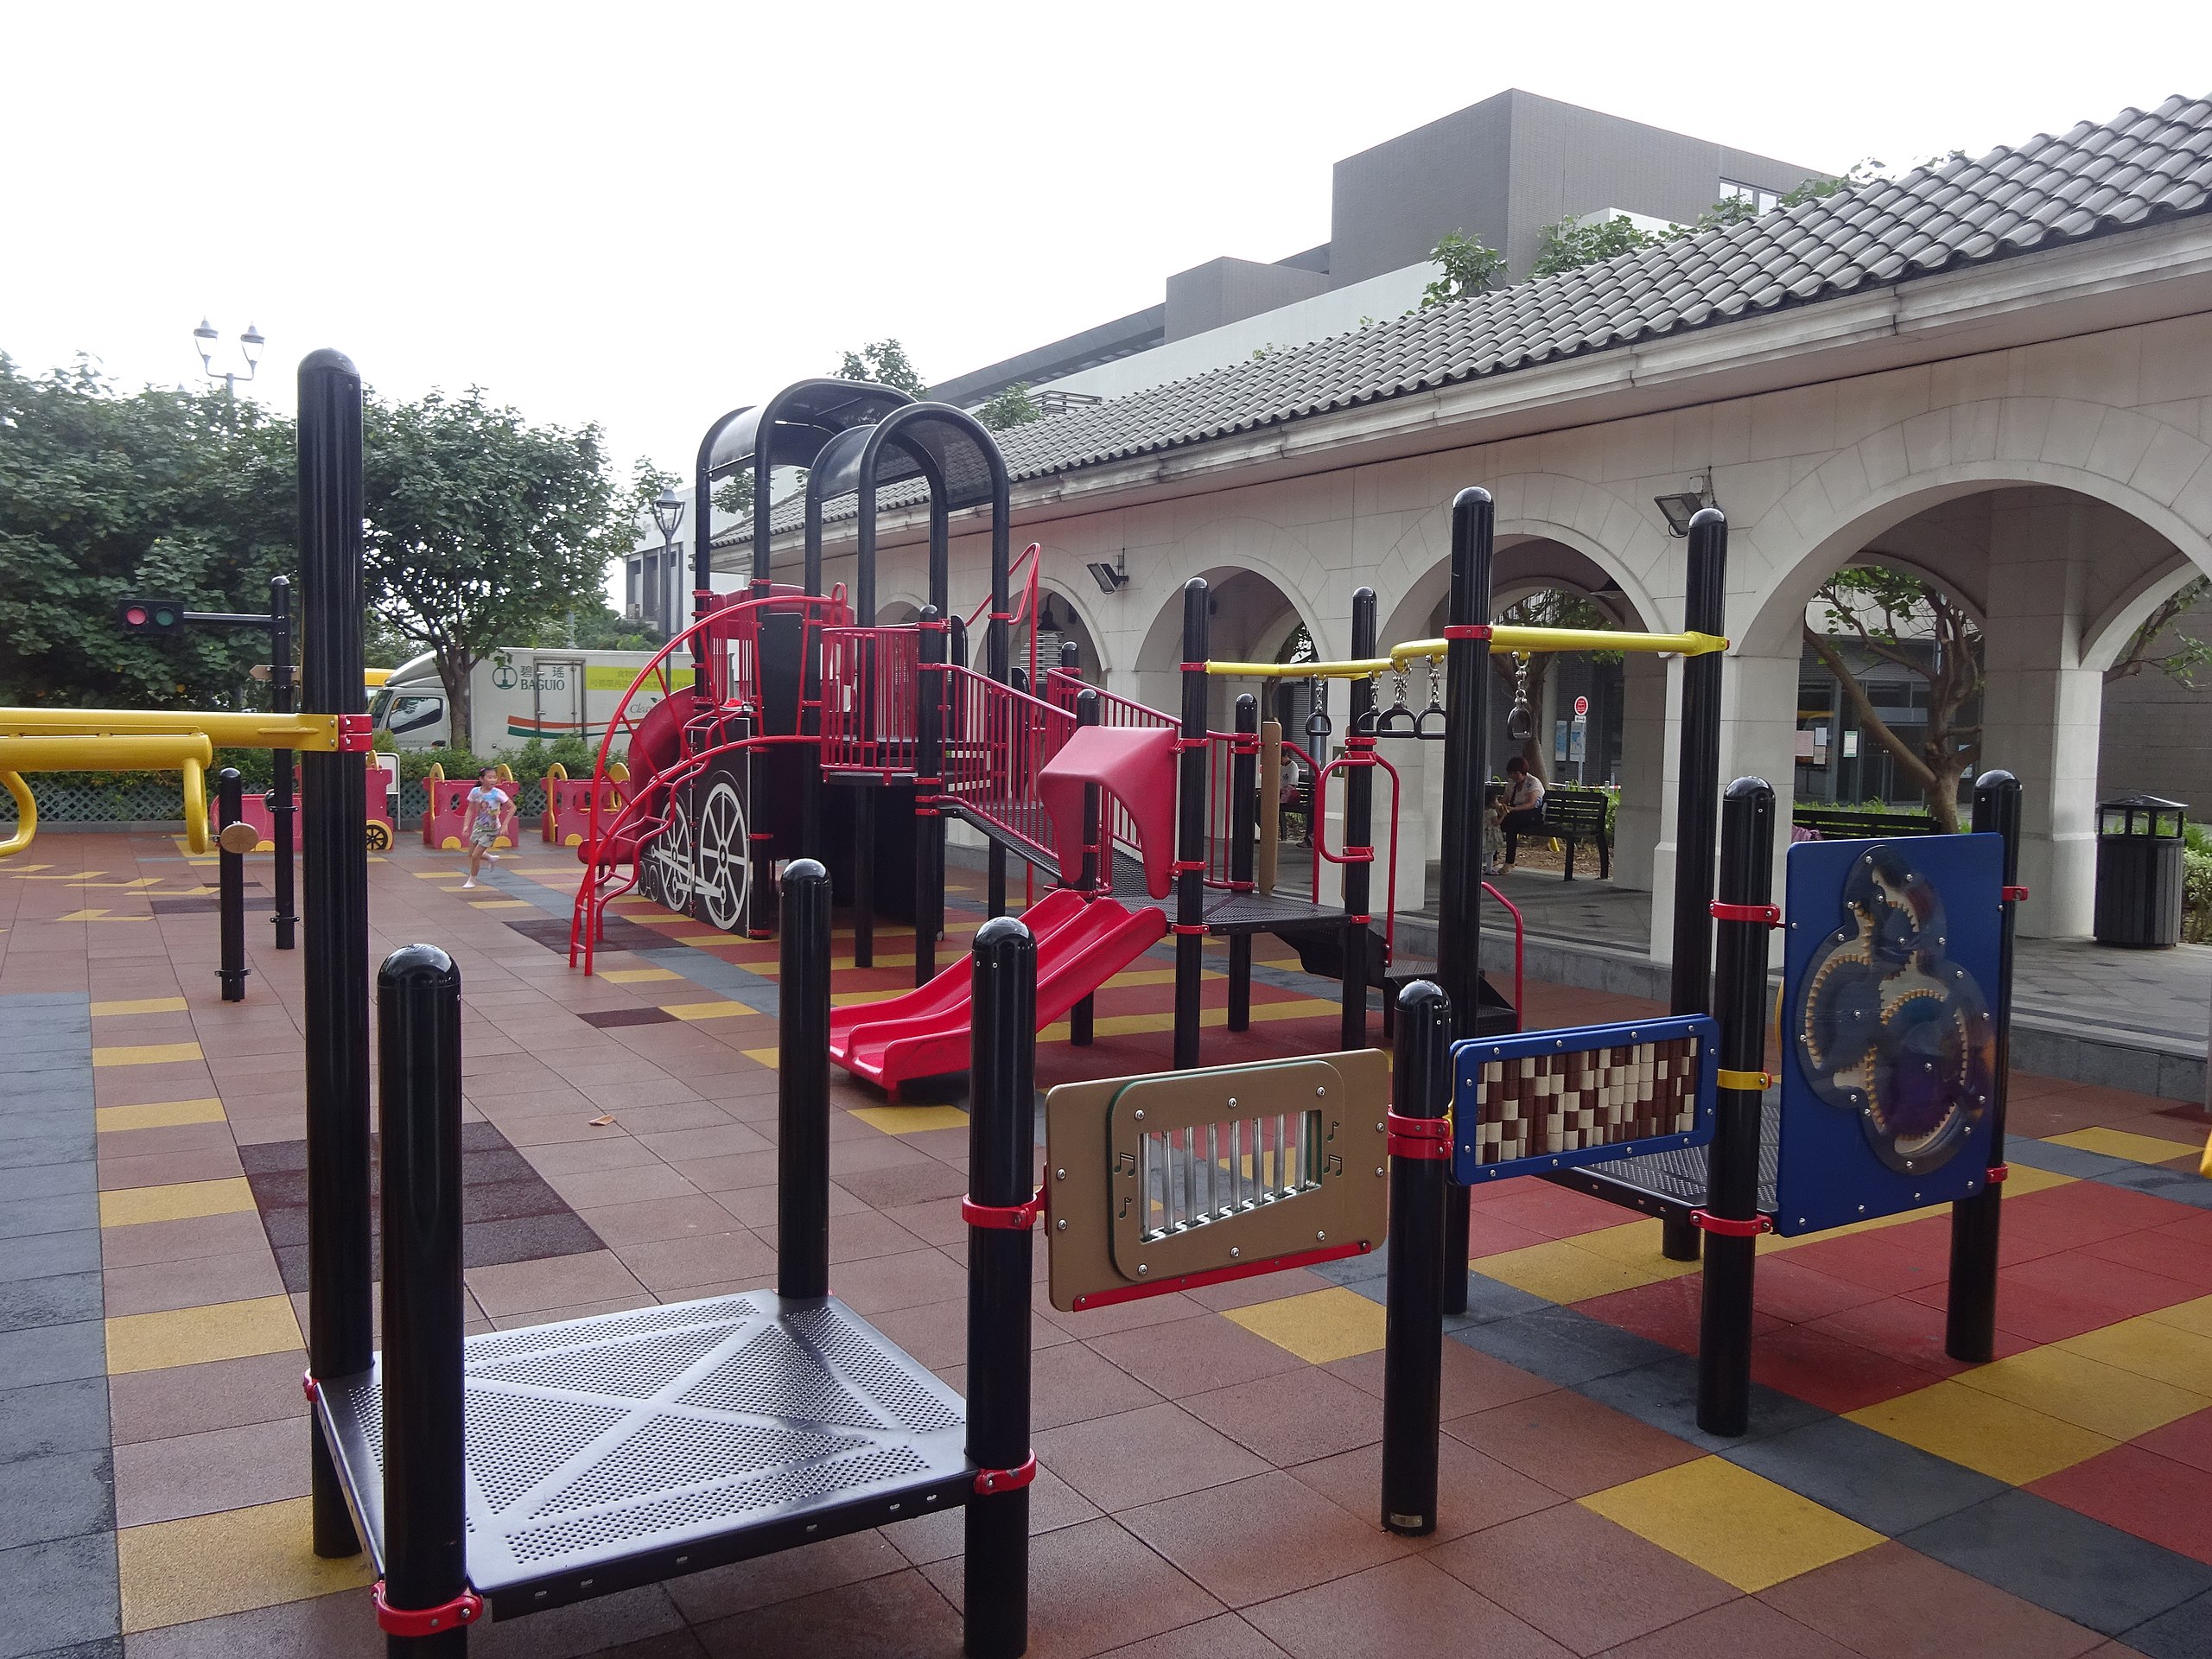 young children can have hours of fun at this railway-themed playground